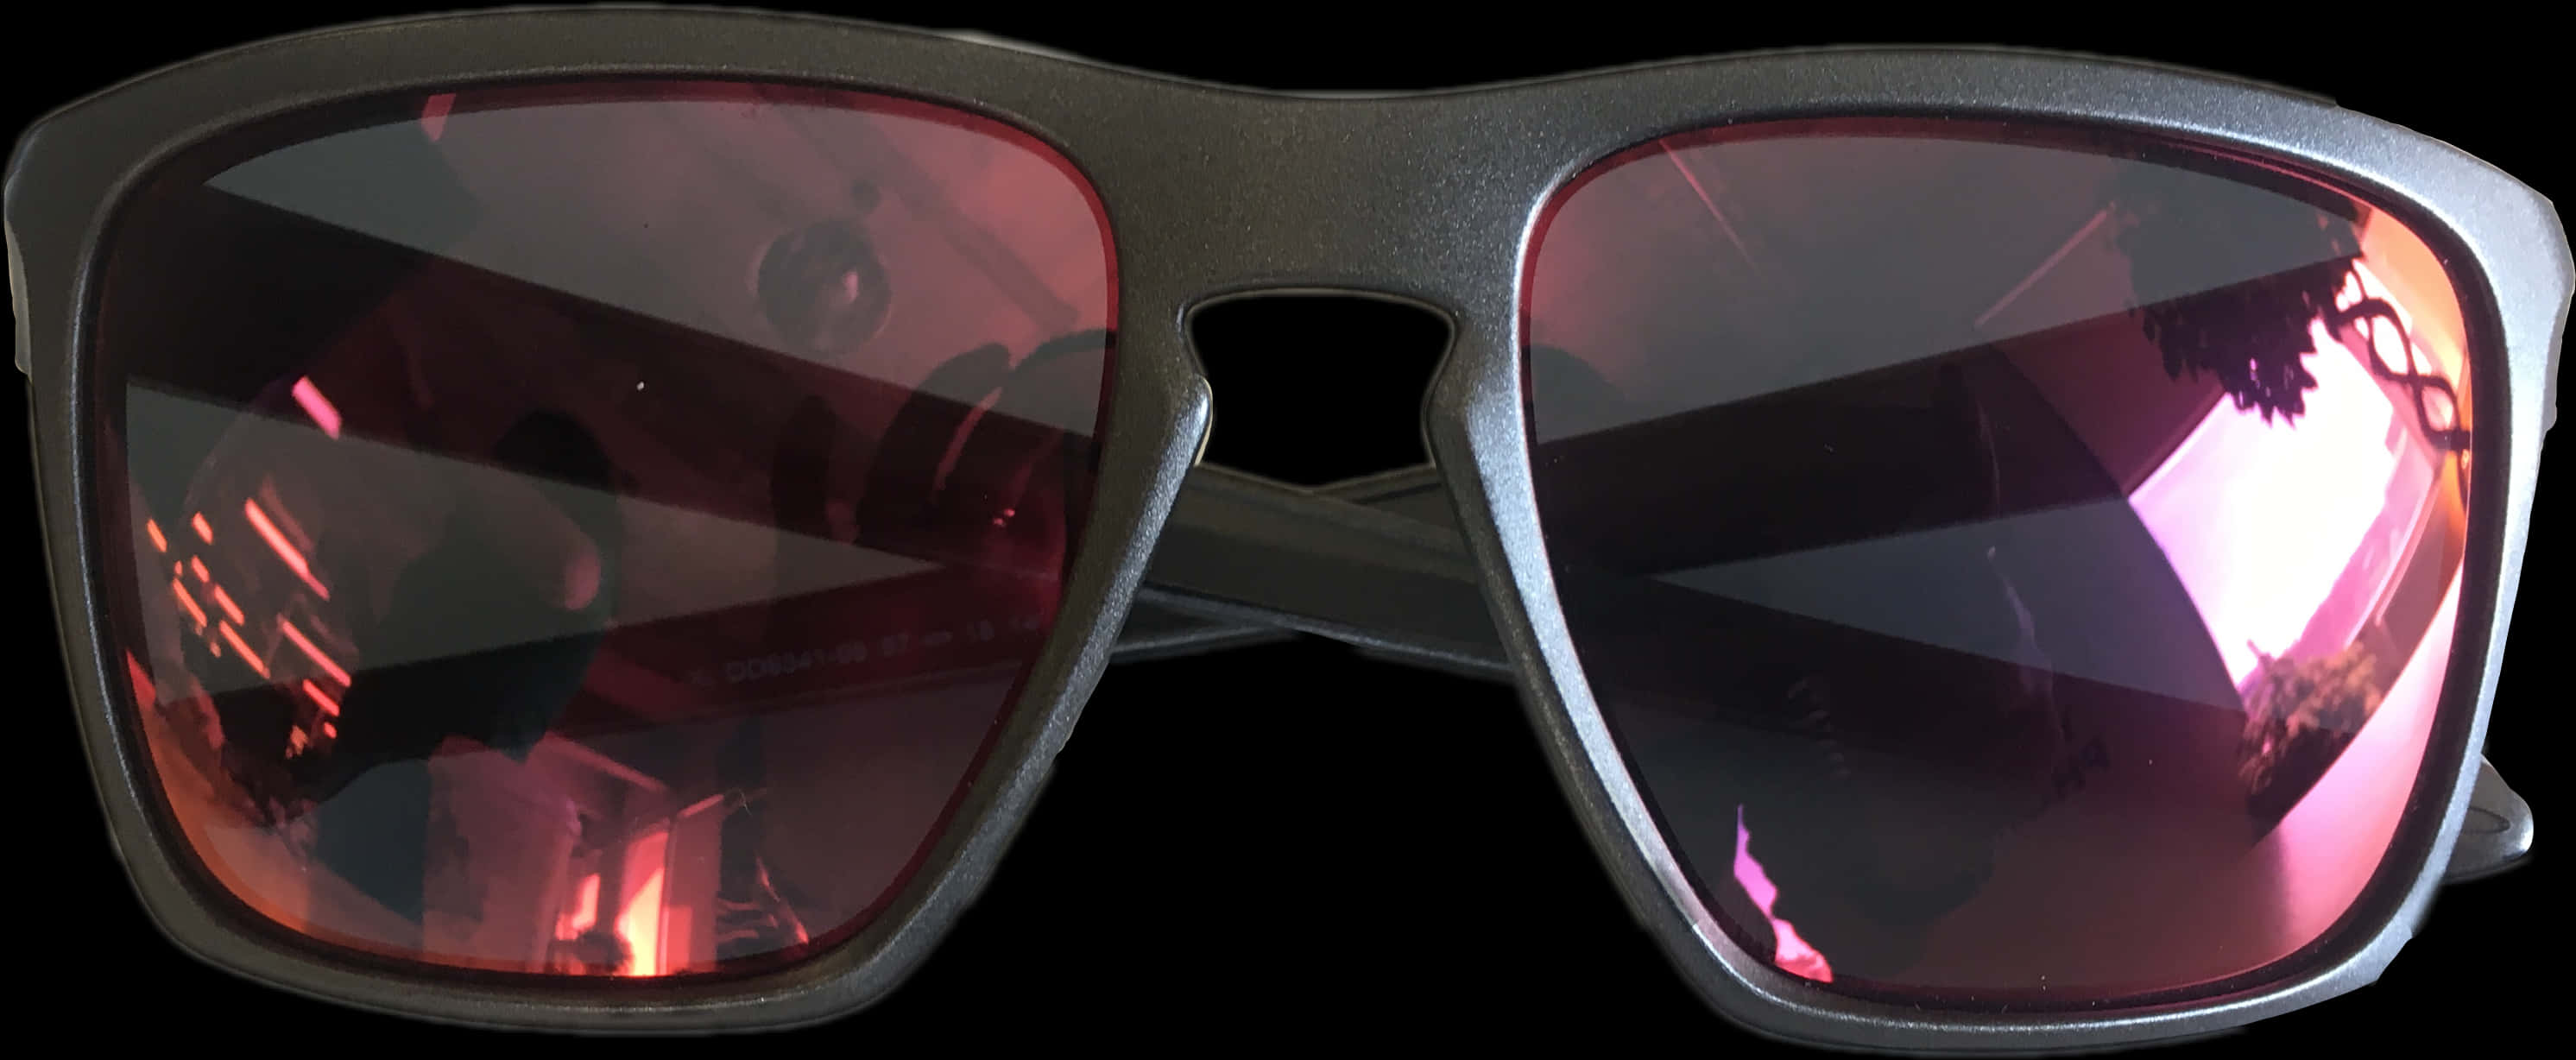 A Pair Of Sunglasses With Pink Lenses